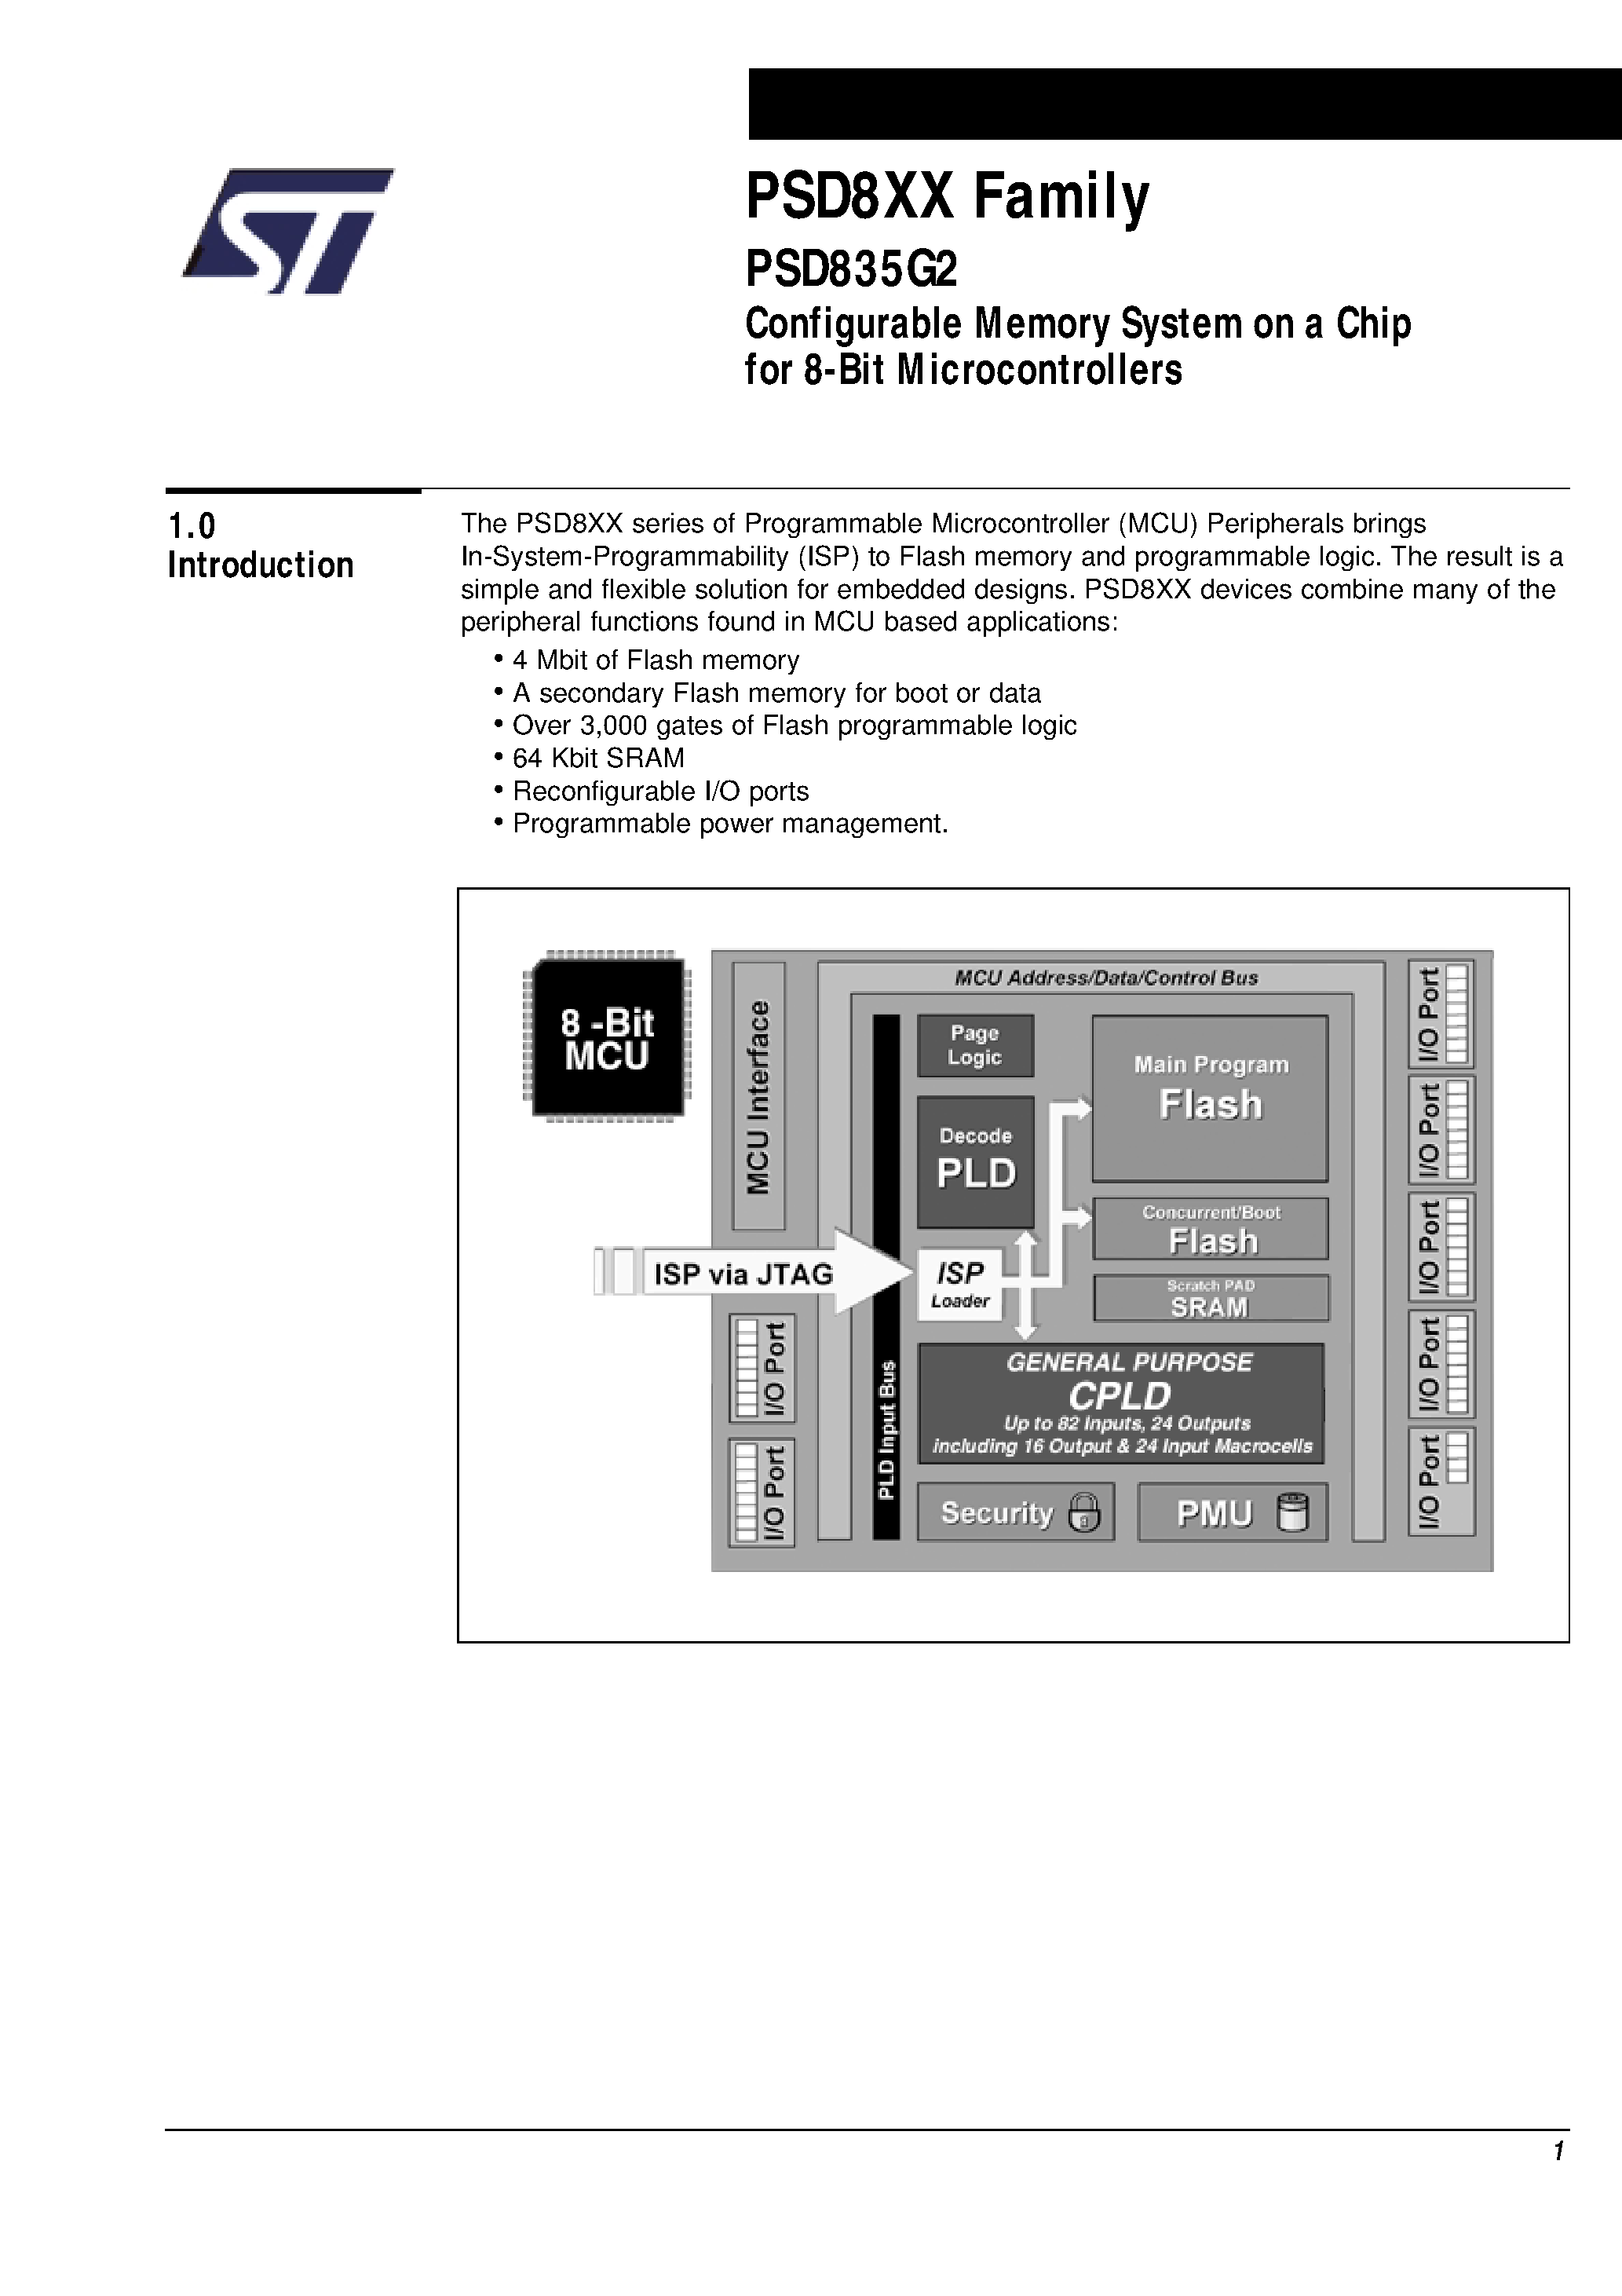 Datasheet PSD835F2-A-90B81I - Configurable Memory System on a Chip for 8-Bit Microcontrollers page 2